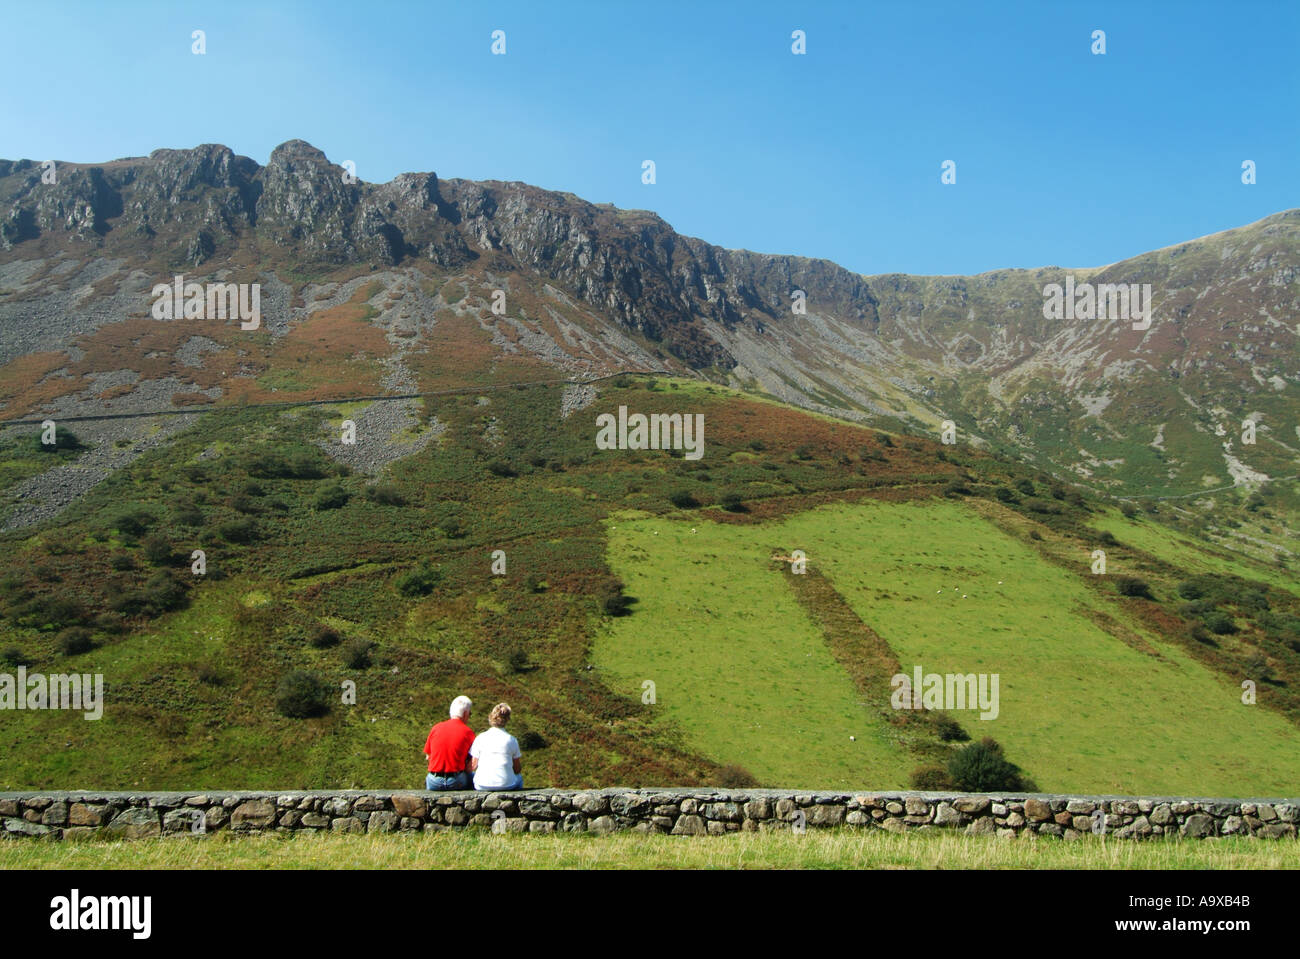 Back view man & woman tourist couple sitting on stone wall in lay by view towards Cader Idris landscape on A487 road Snowdonia Gwynedd North Wales UK Stock Photo